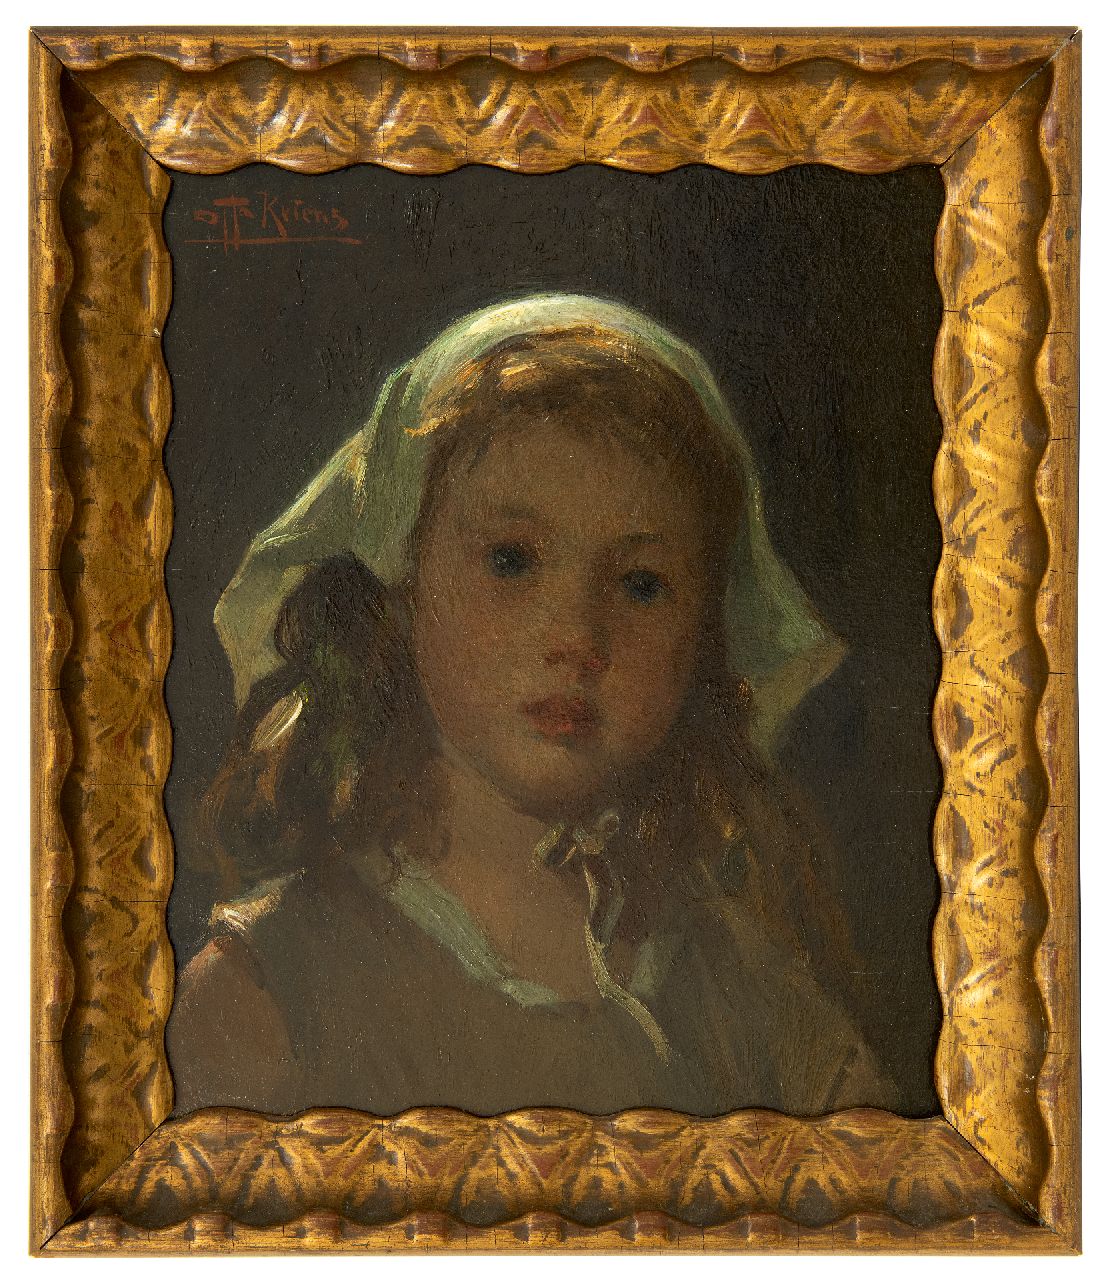 Kriens O.G.A.  | 'Otto' Gustav Adolf Kriens | Paintings offered for sale | Girl's head, oil on panel 33.0 x 27.2 cm, signed u.l.